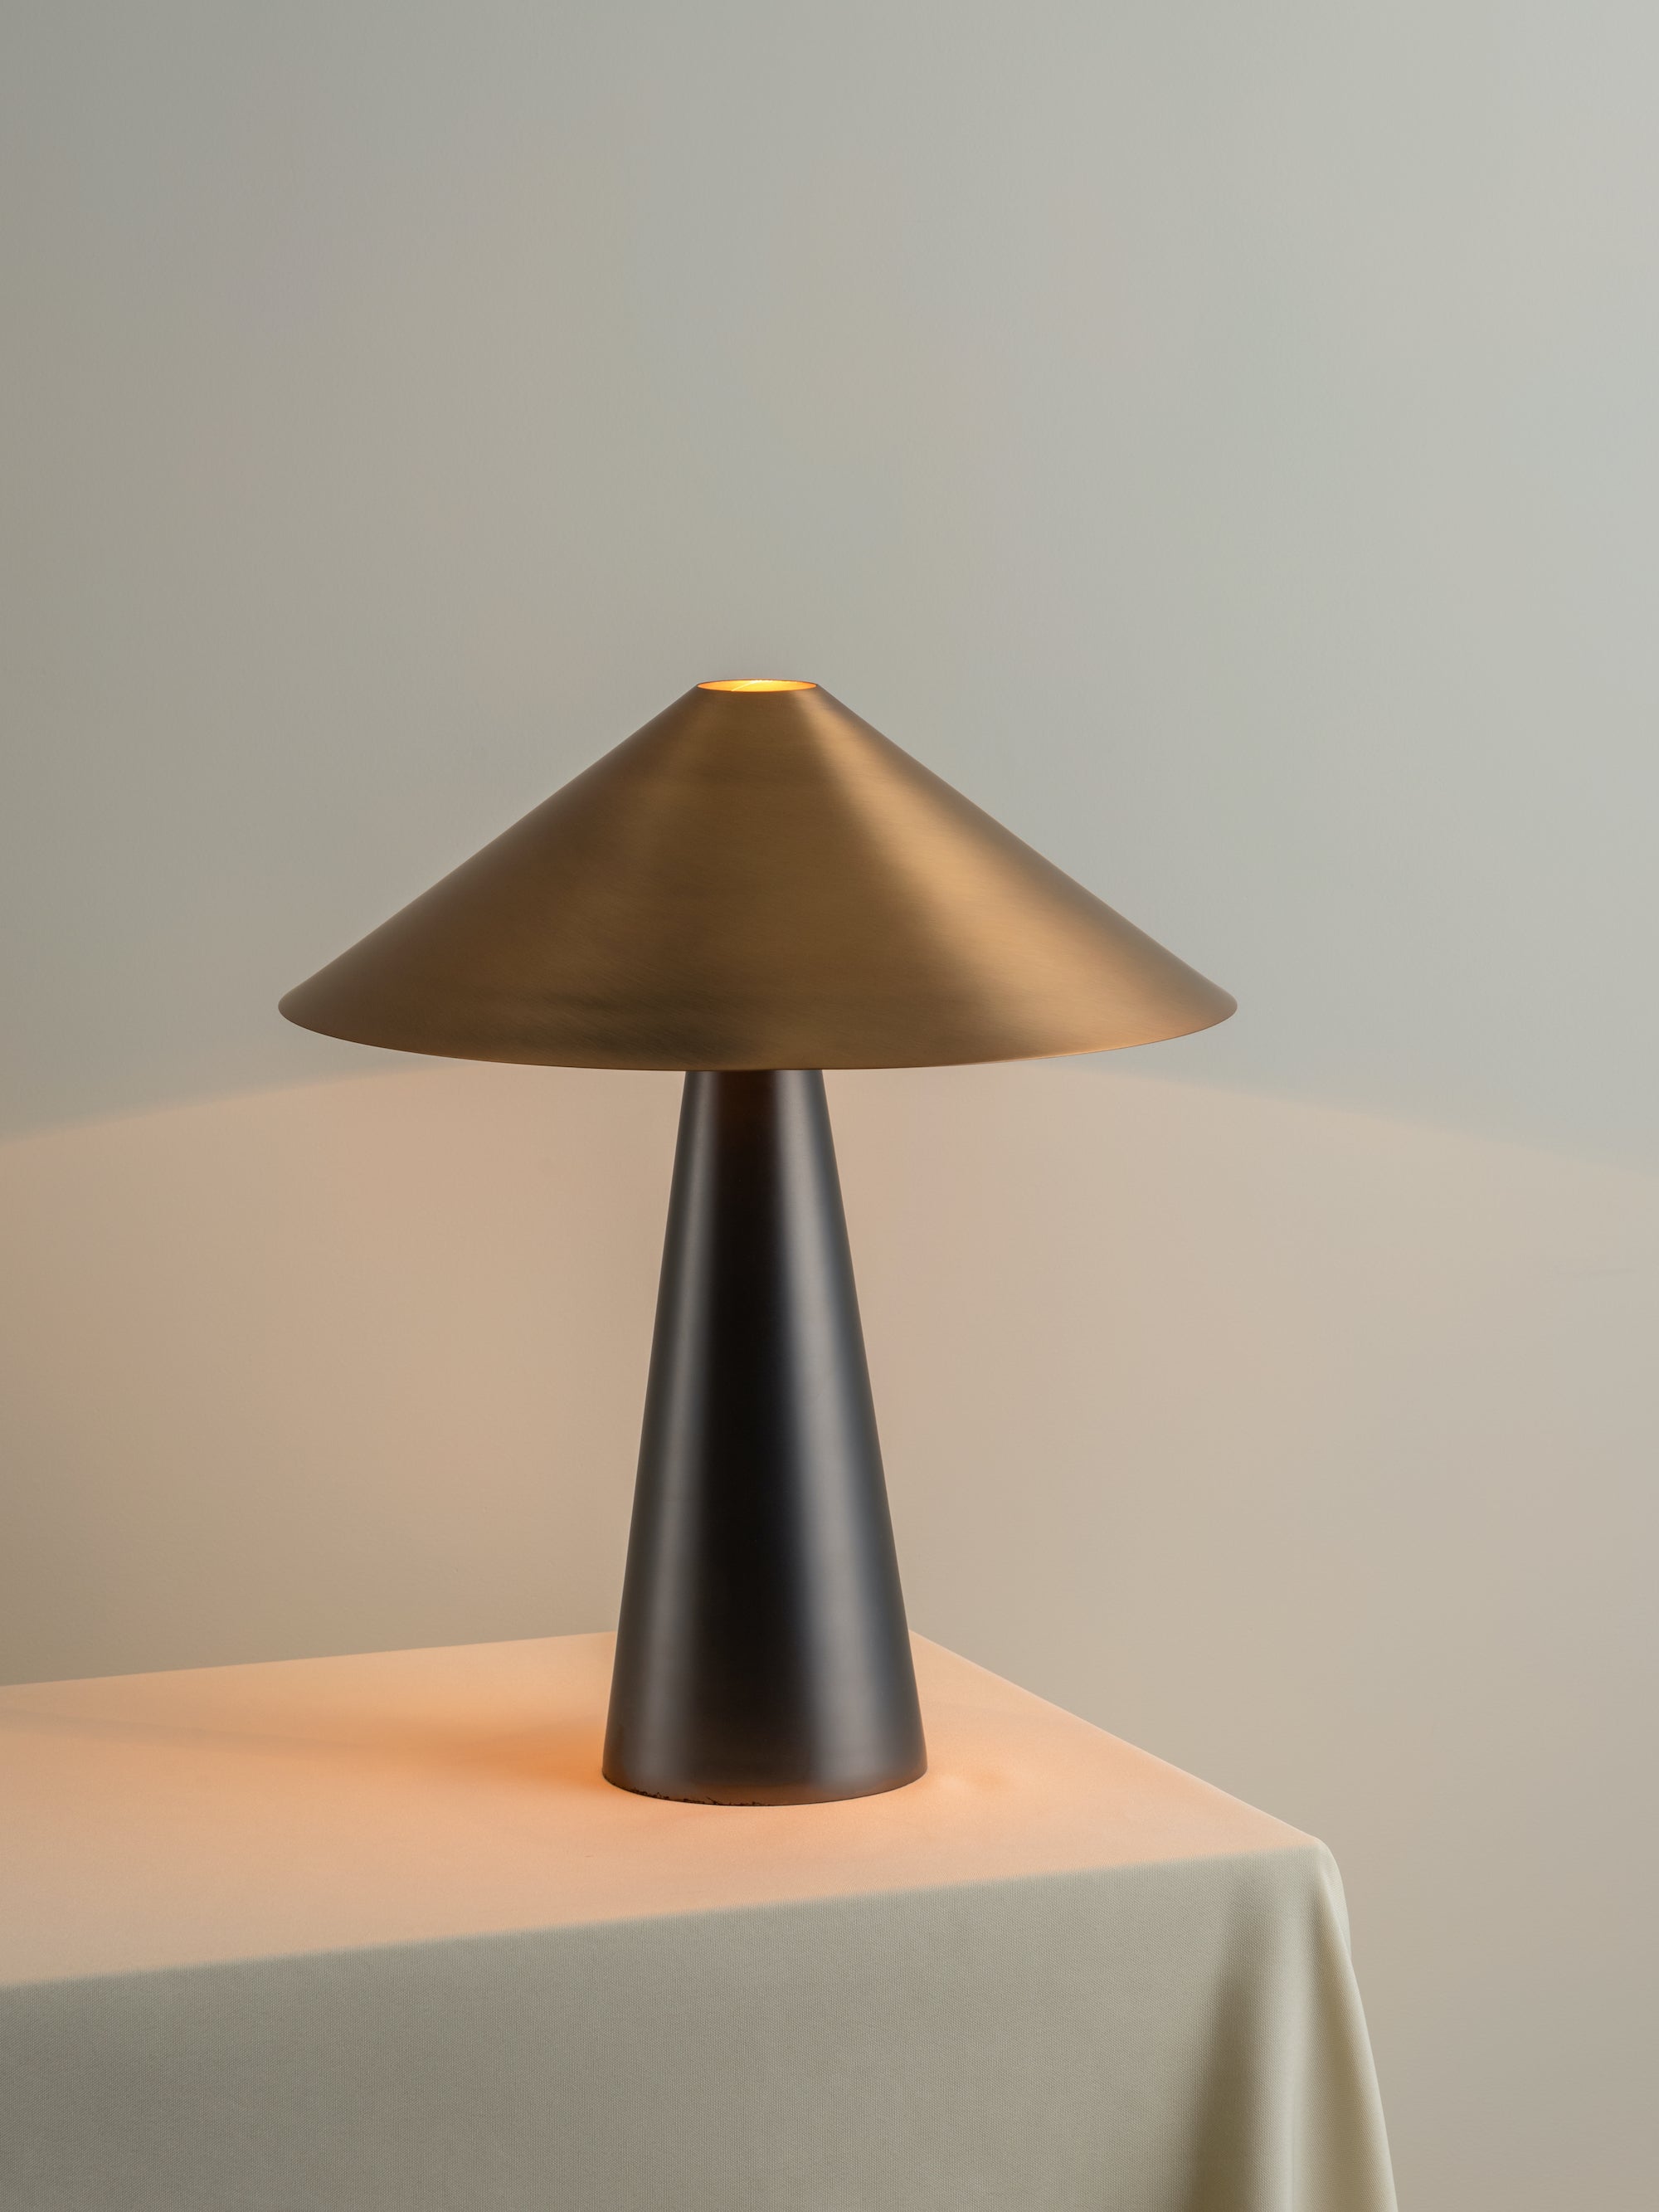 Orta - 1 light antique silver and burnished brass cone table lamp | Table Lamp | Lights & Lamps Inc | Modern Affordable Designer Lighting | USA